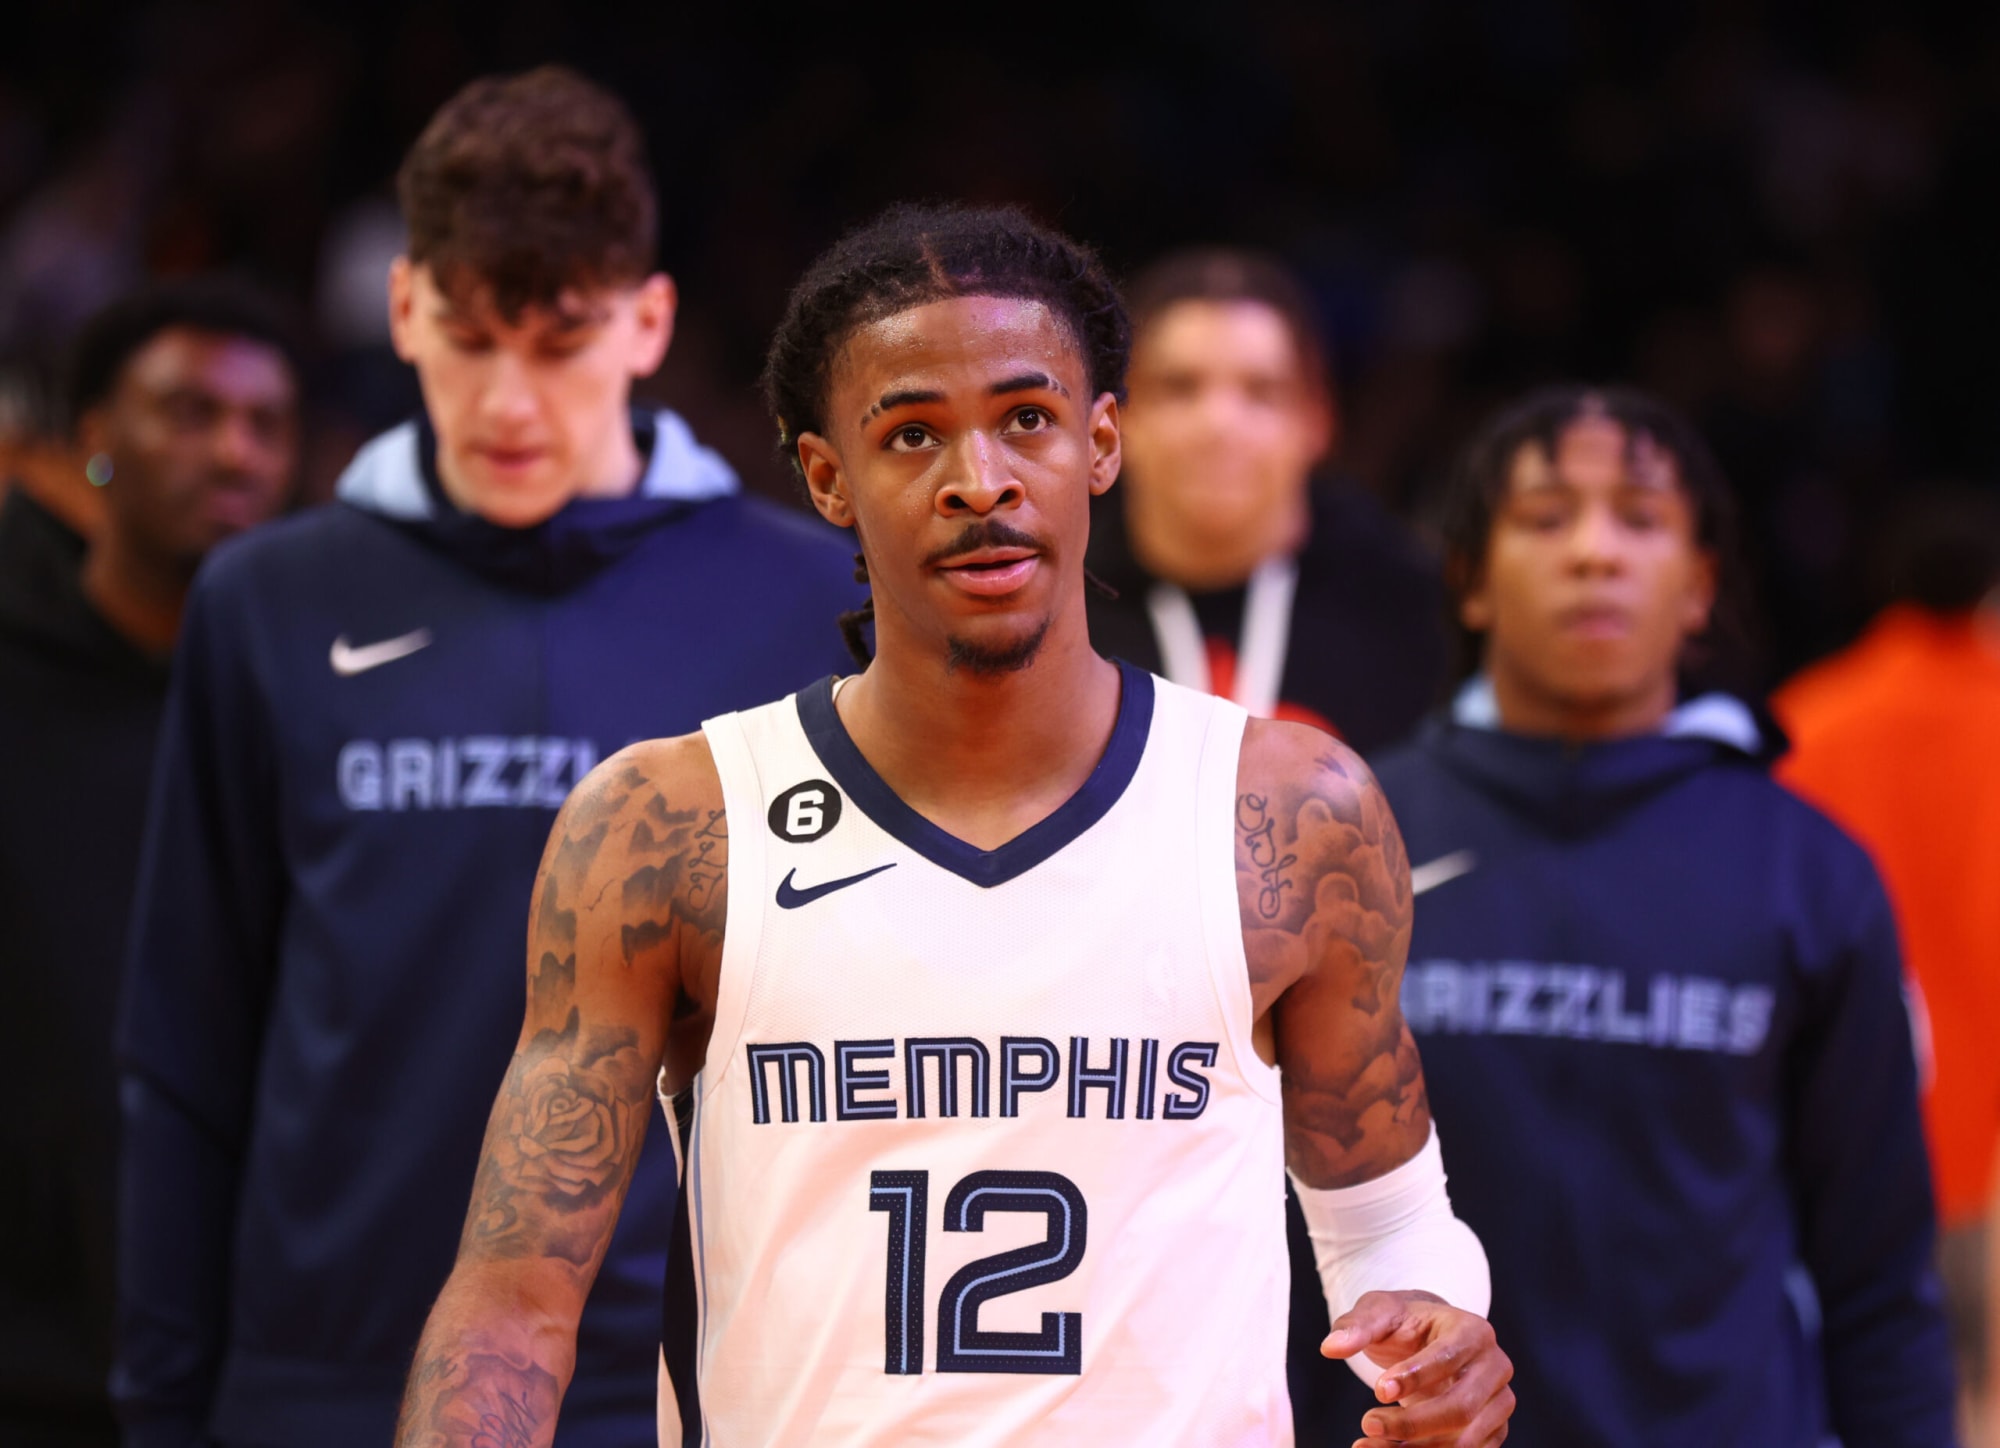 Grizzlies: $76 million acquisition predicted to 'fit in beautifully